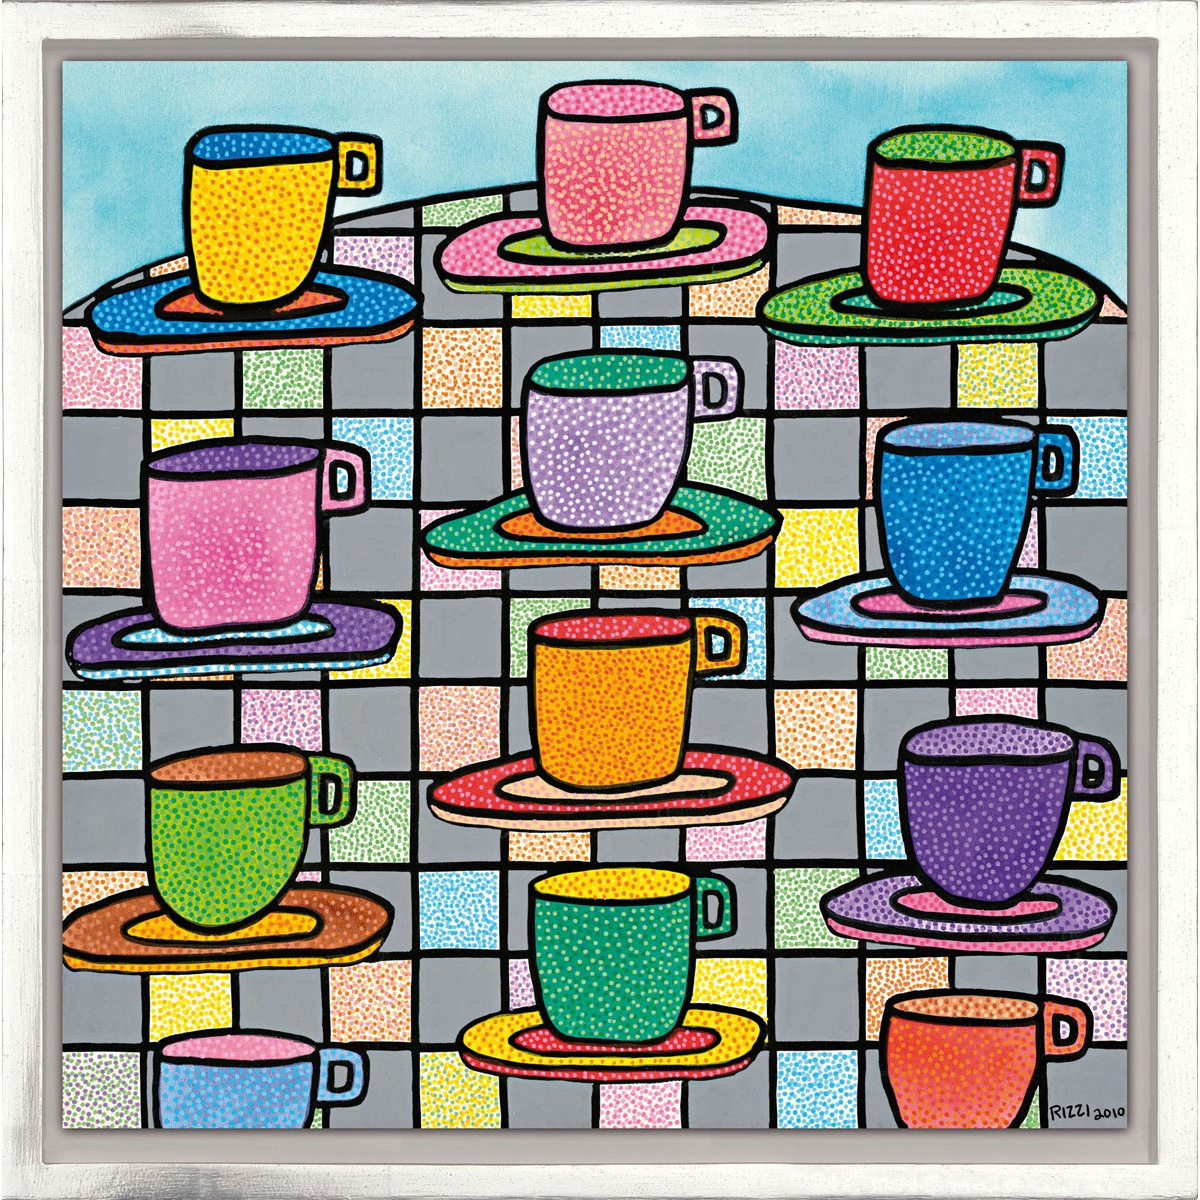 The most colorful cups of coffee von James Rizzi mit Rahmung